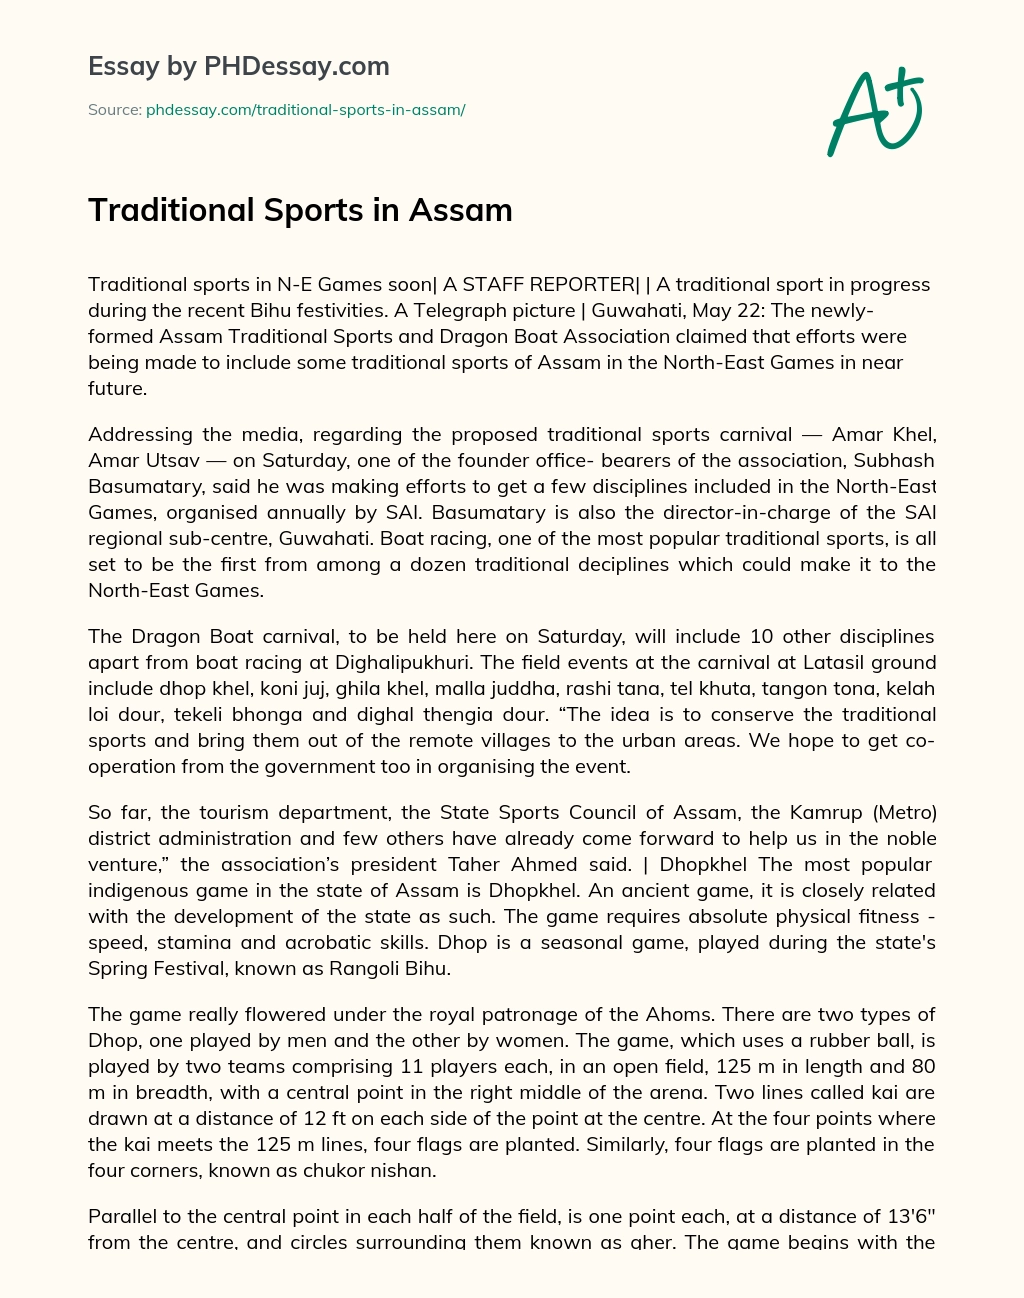 Traditional Sports in Assam essay